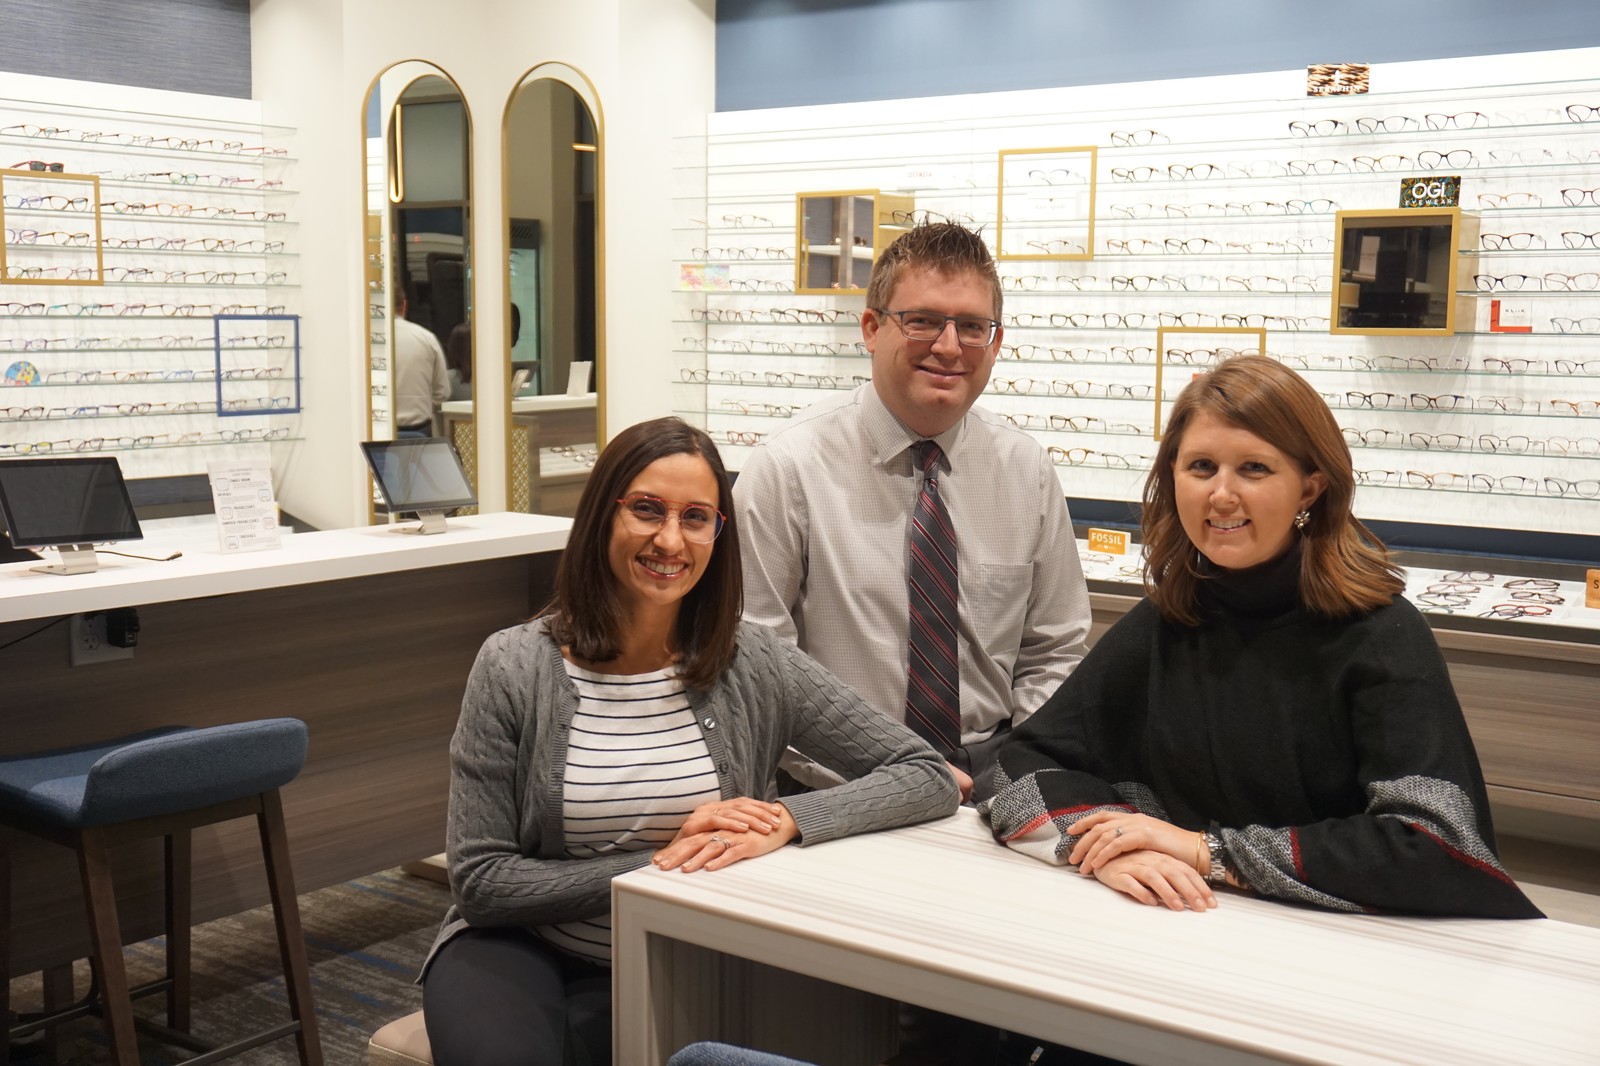 https://static.citylifestyle.com/articles/your-favorites-this-year/Liberty%20Eyecare%201-1600.jpg?v=1